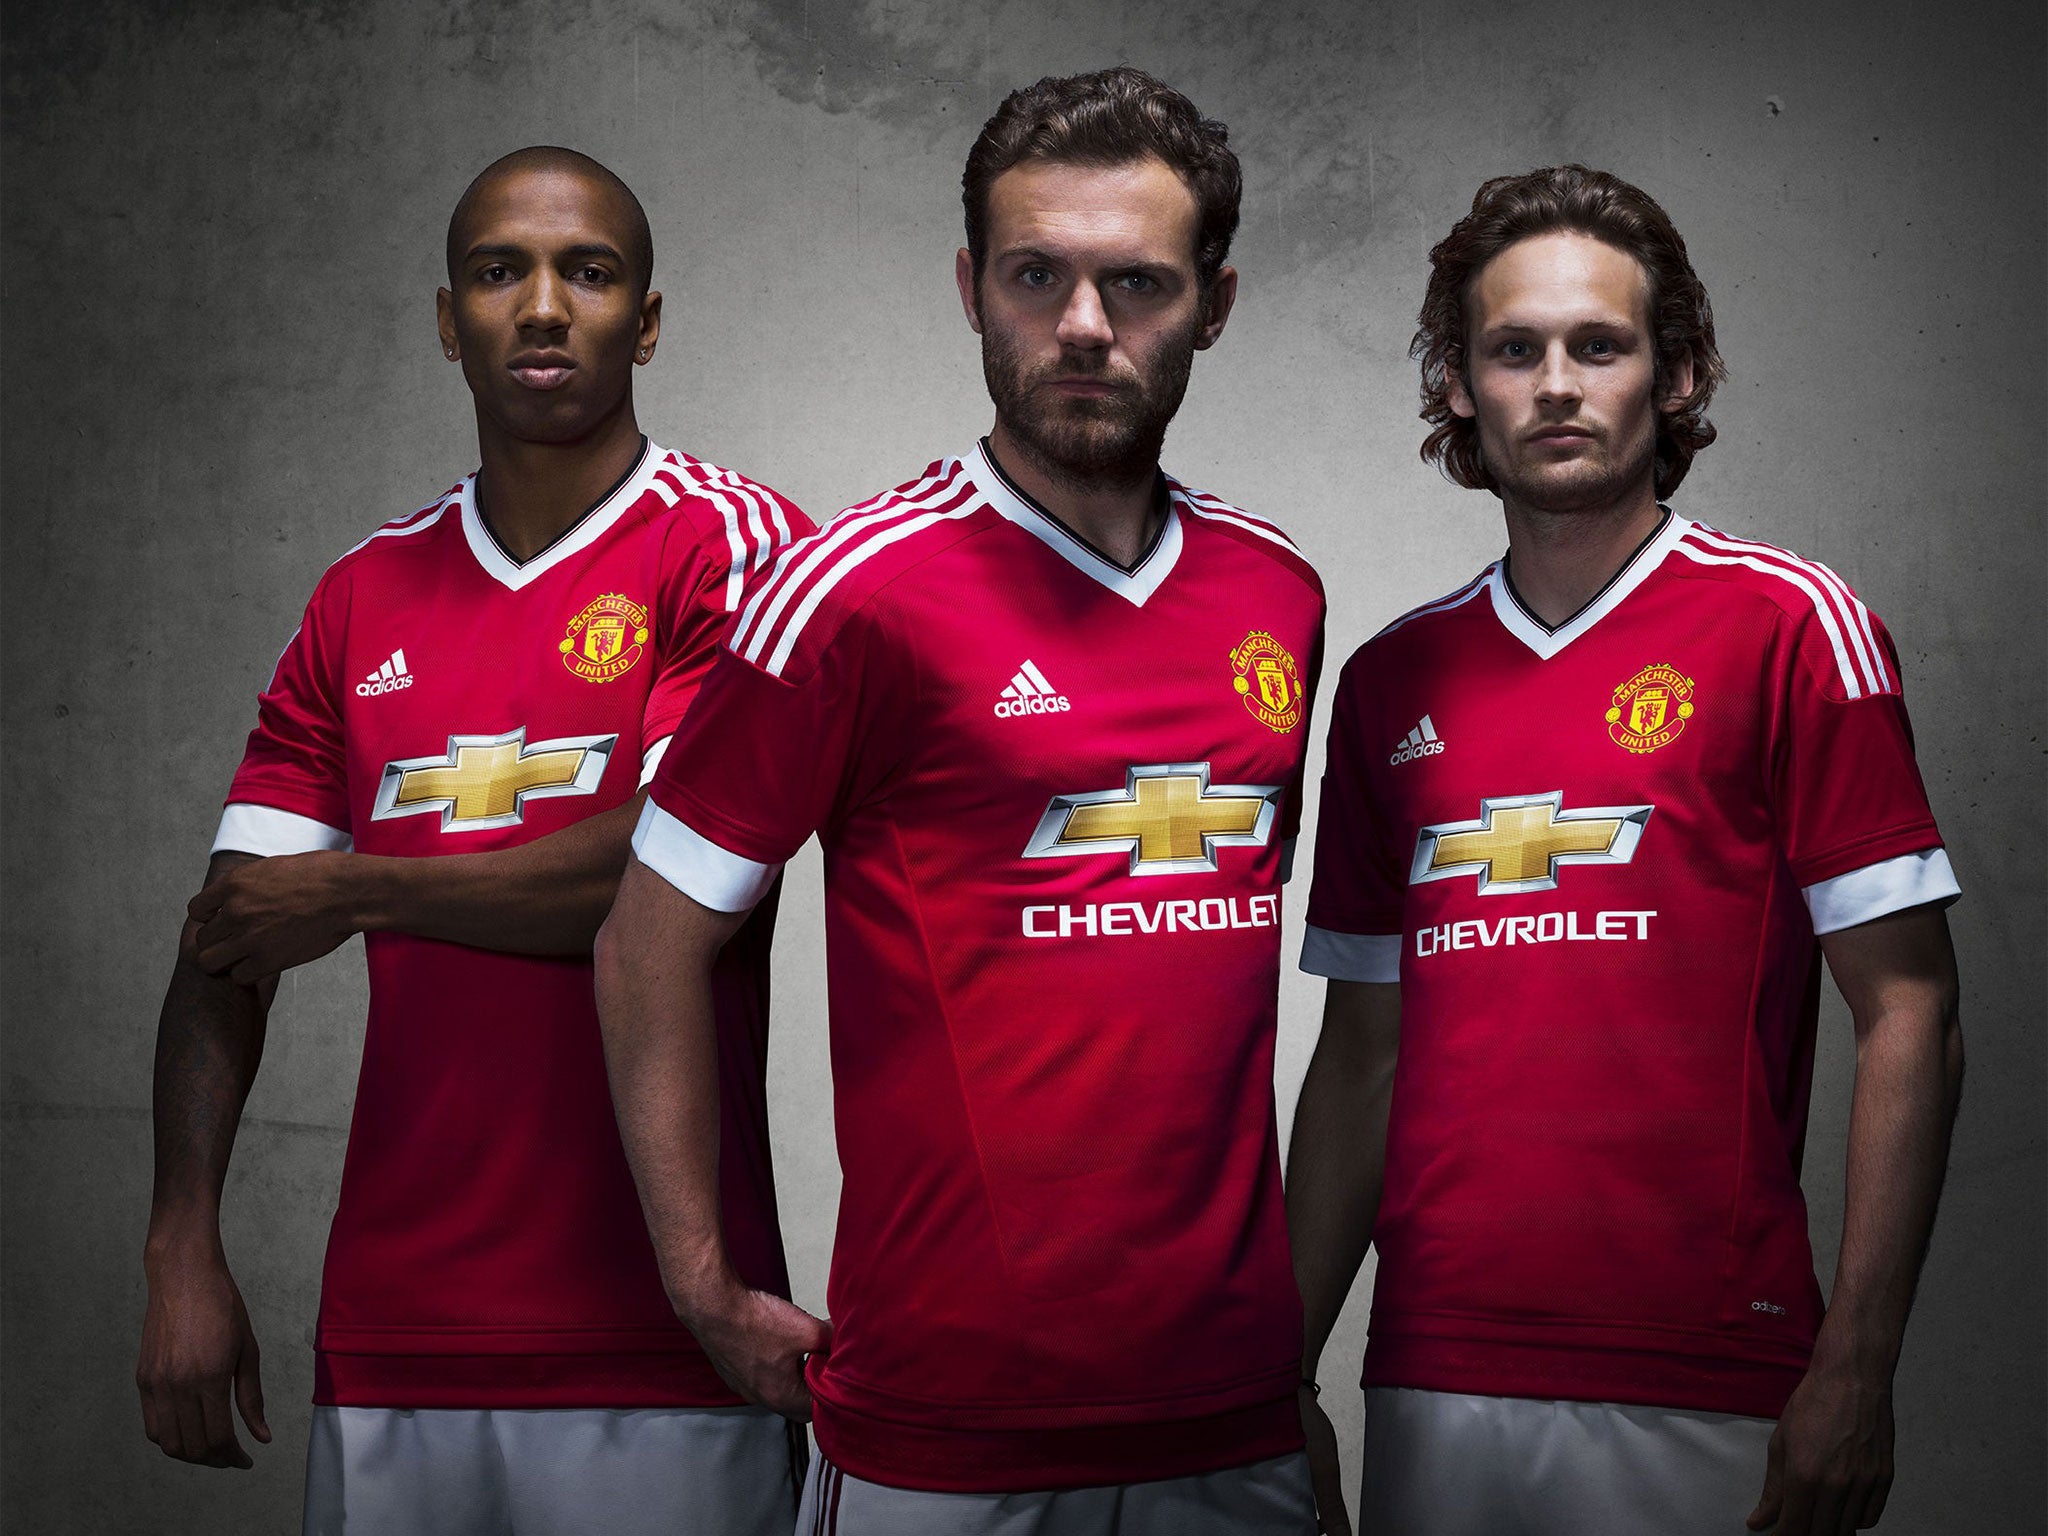 Manchester United 2015/16 kit unveiled 